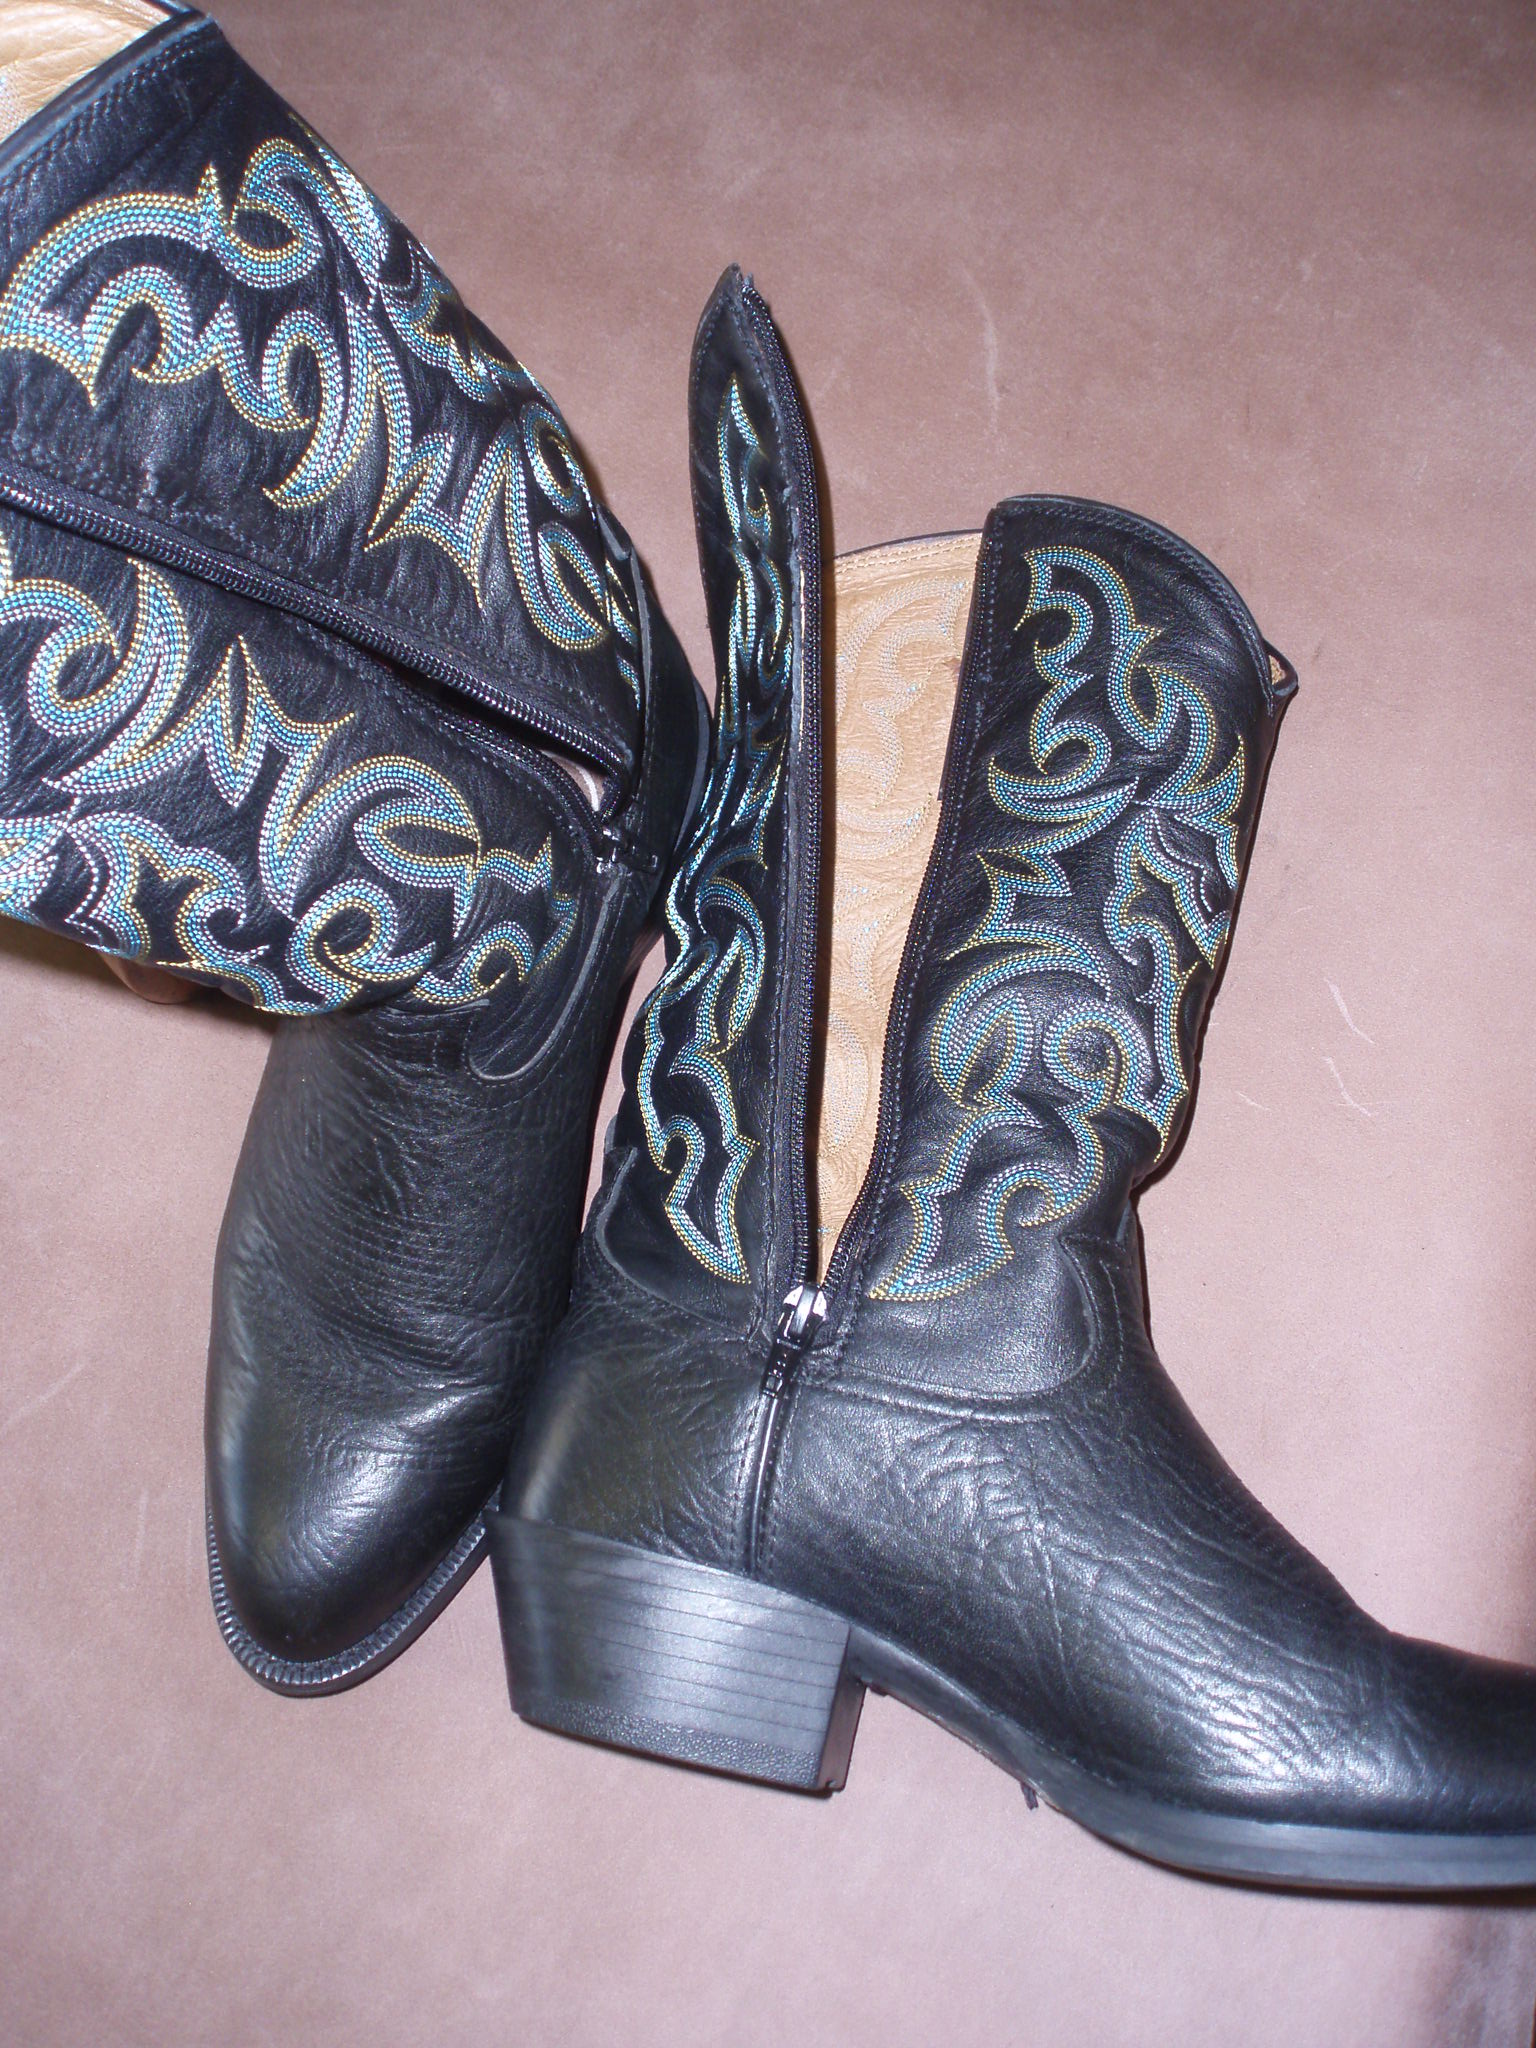 Cowboy boots with zippers we installed,